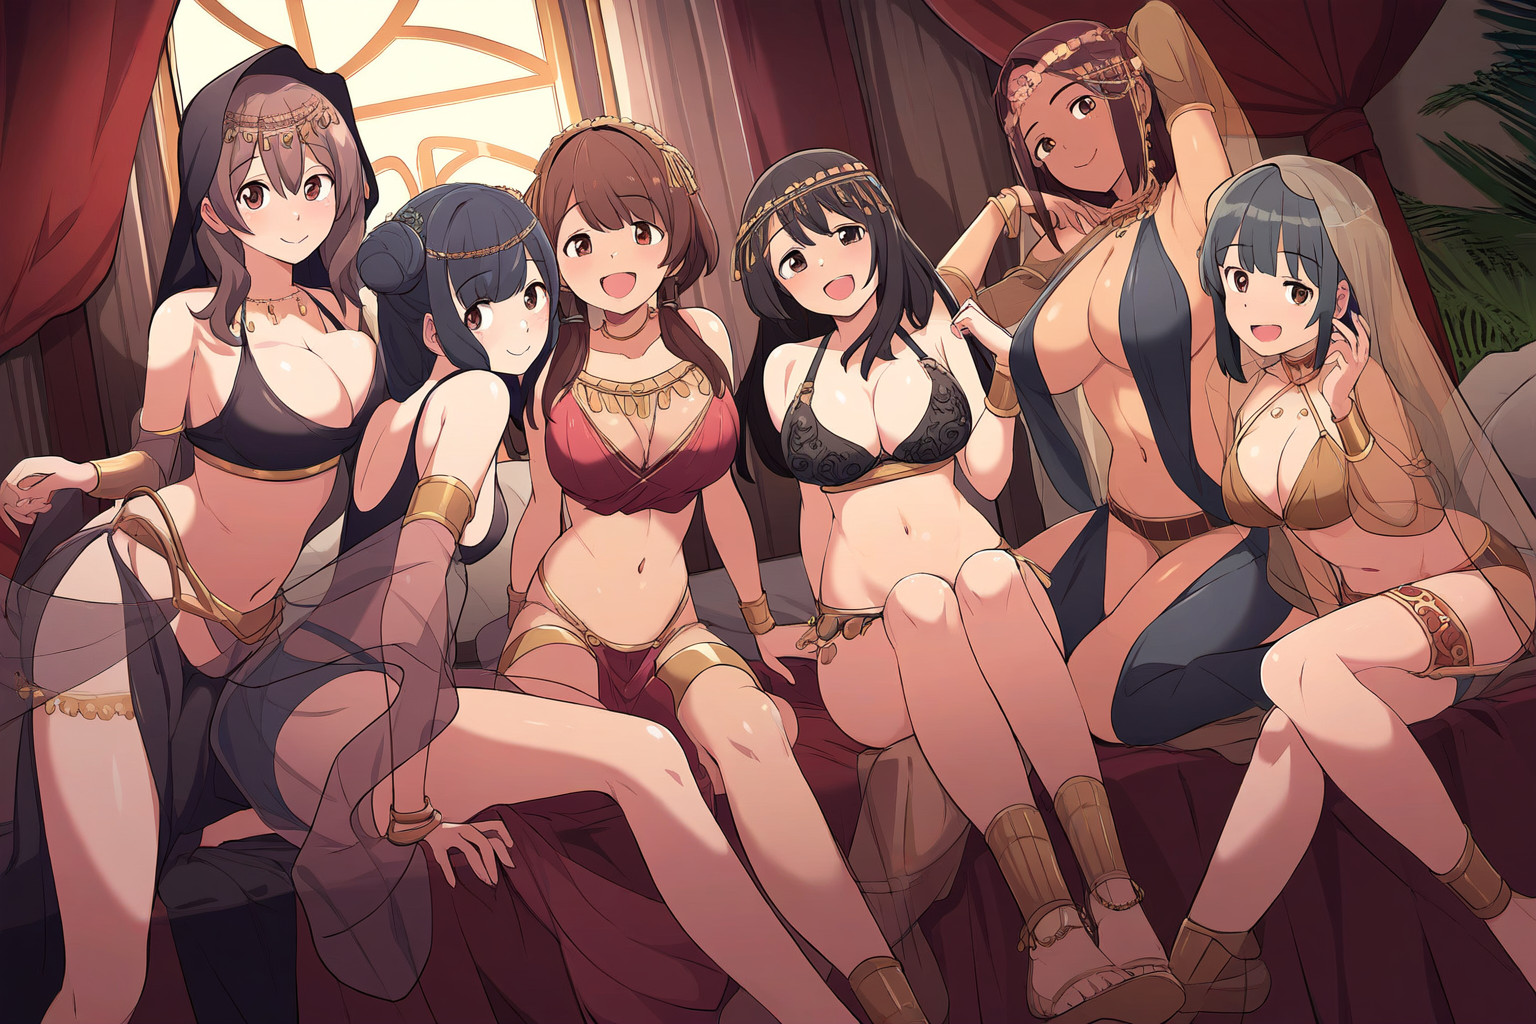 Life in a harem